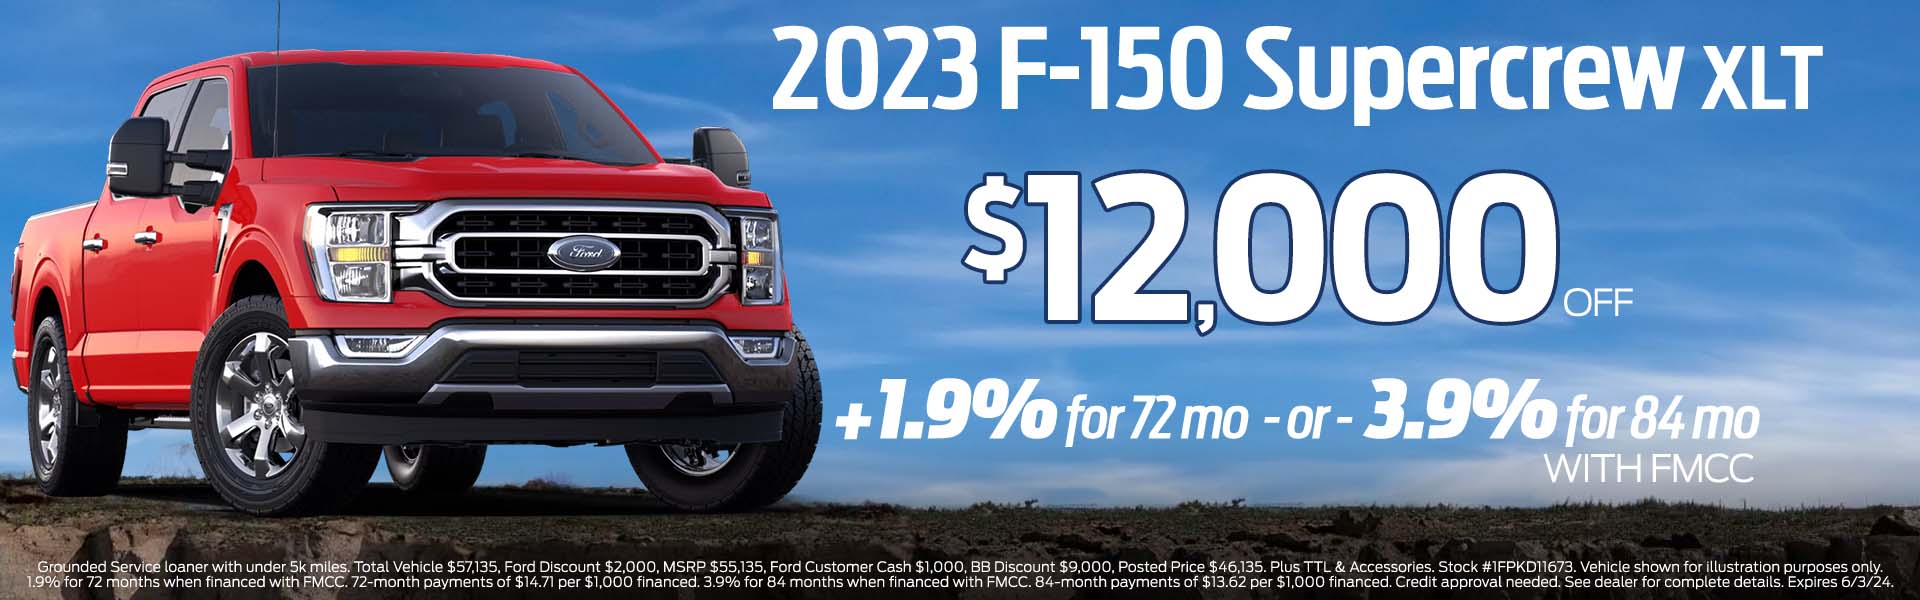 $12,000 off with FMCC F-150. 1.9% at 72 or 3.9% at 84 APR